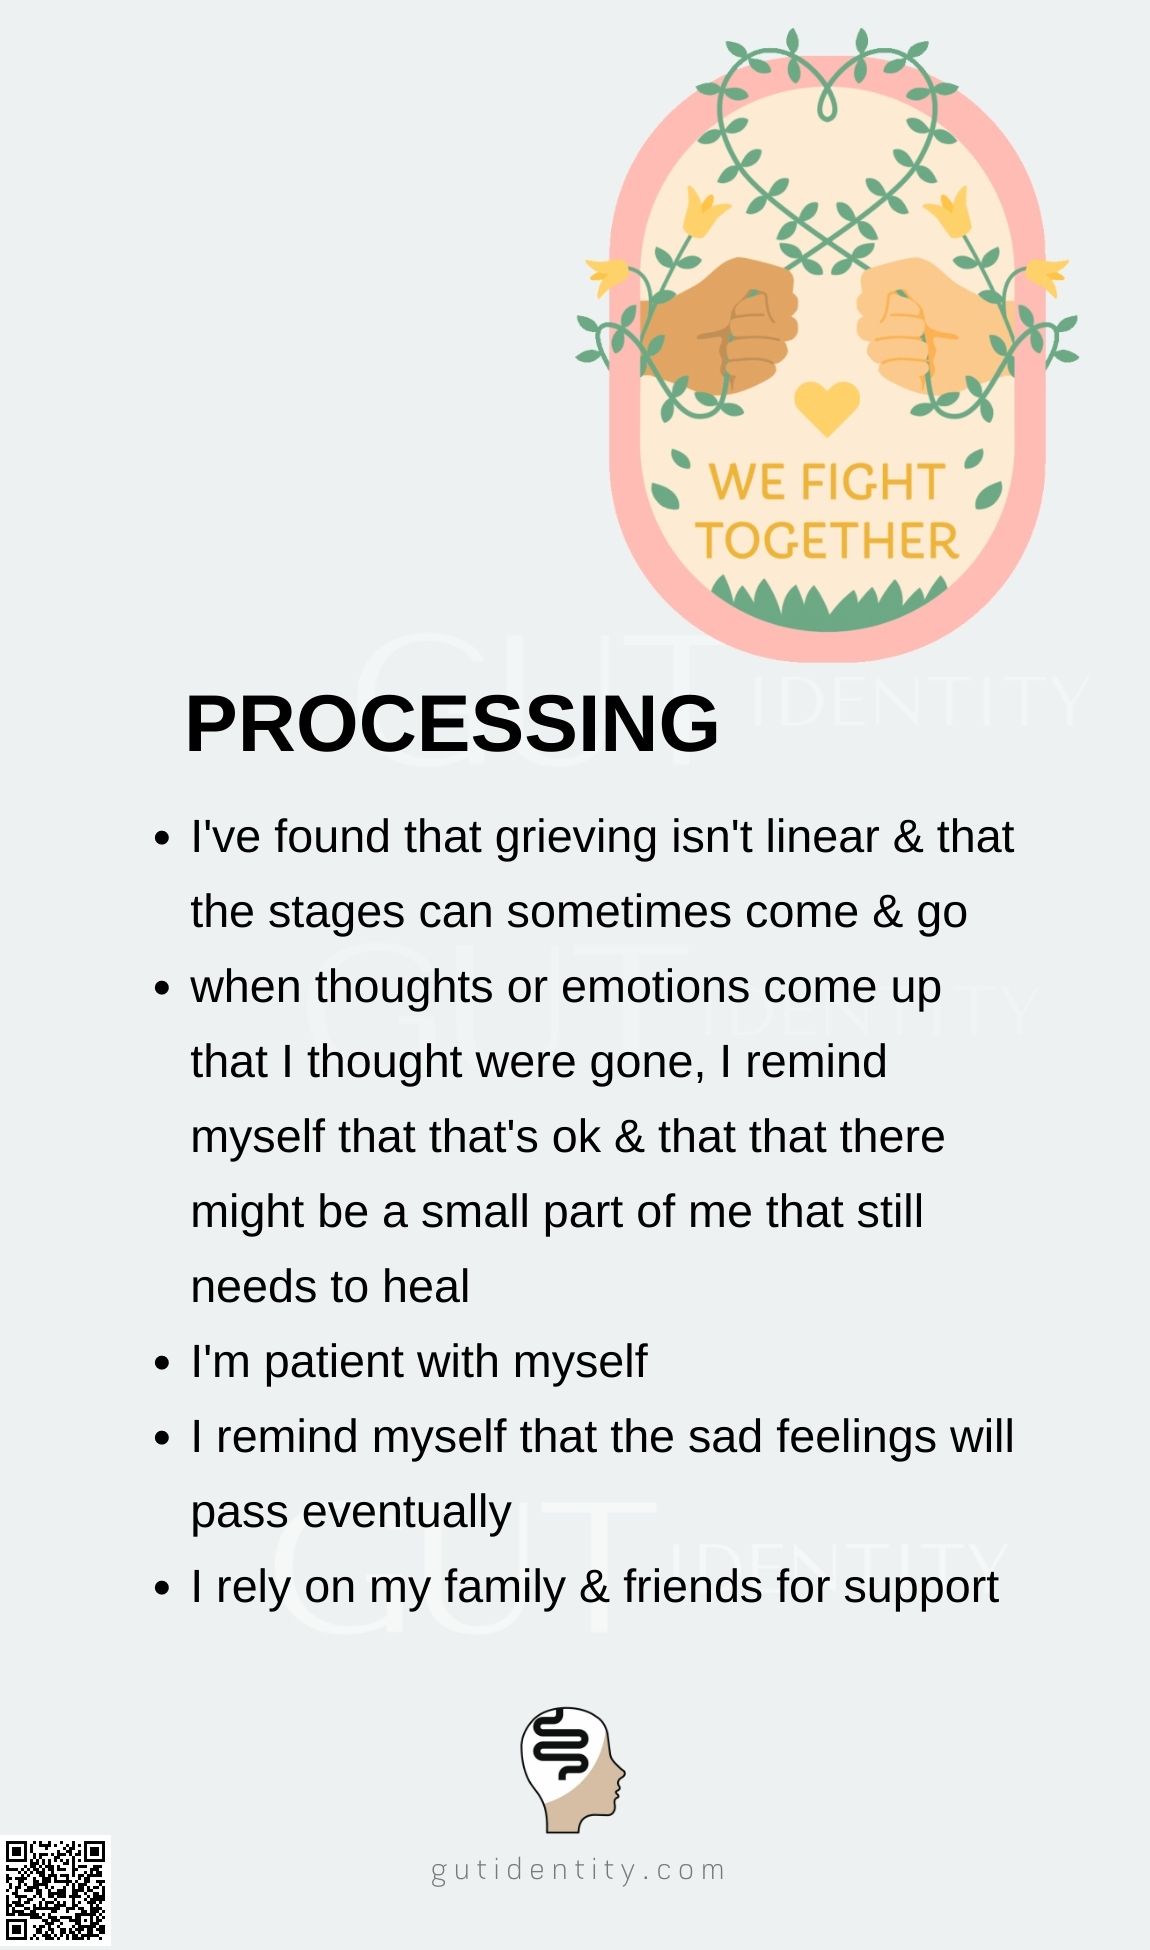 The processing stage in grief